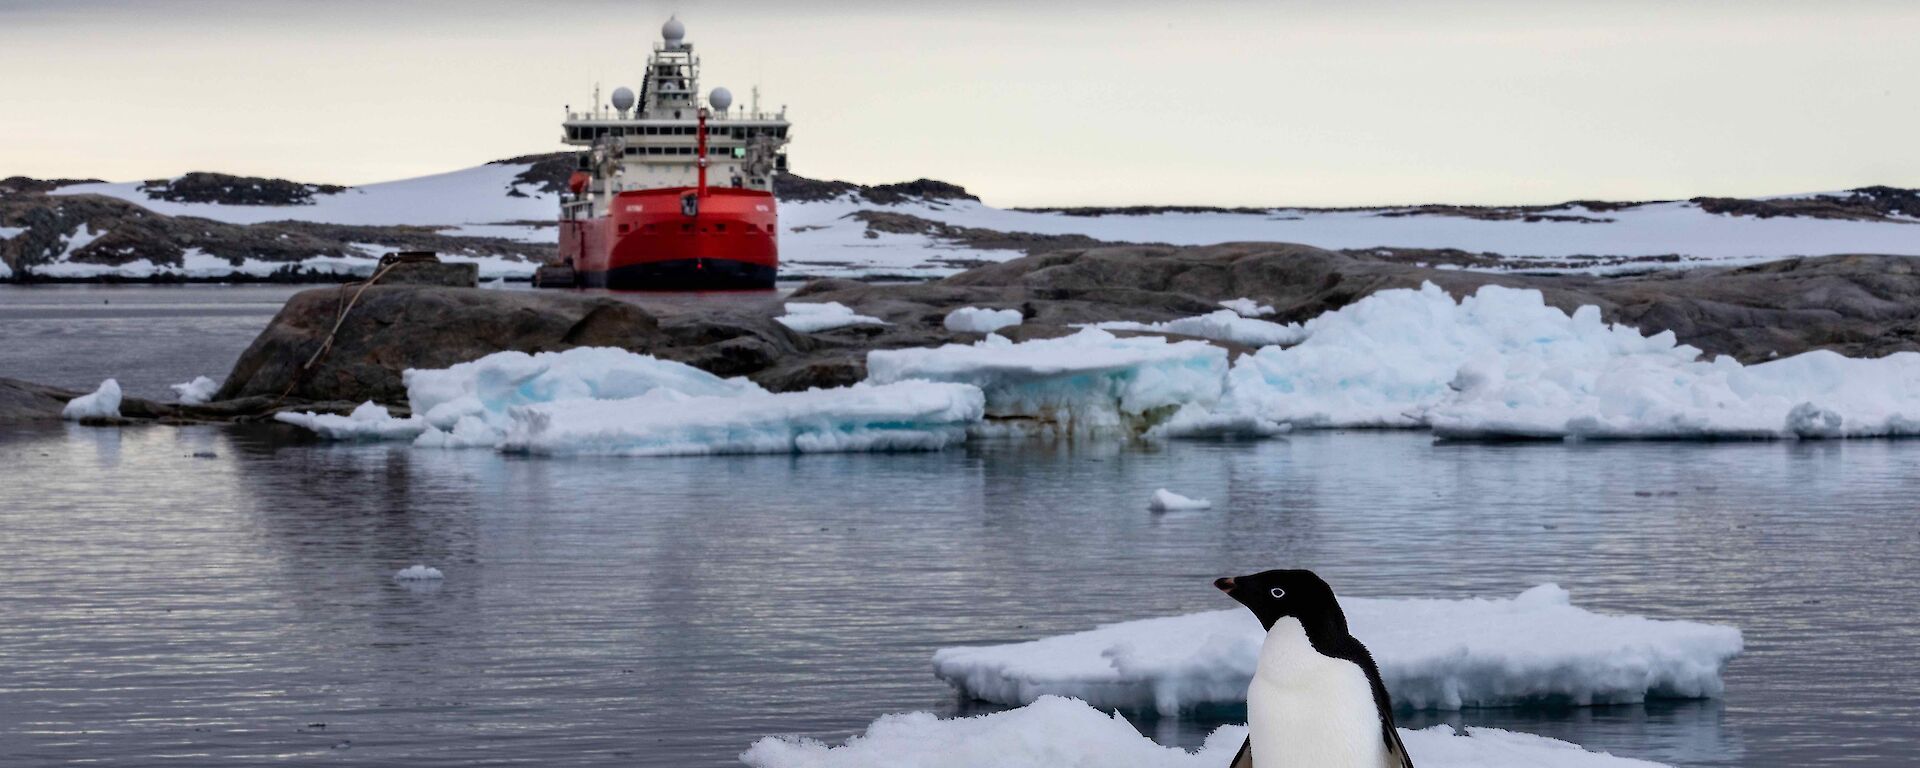 A penguin sits on an ice flow in front of a large red ship